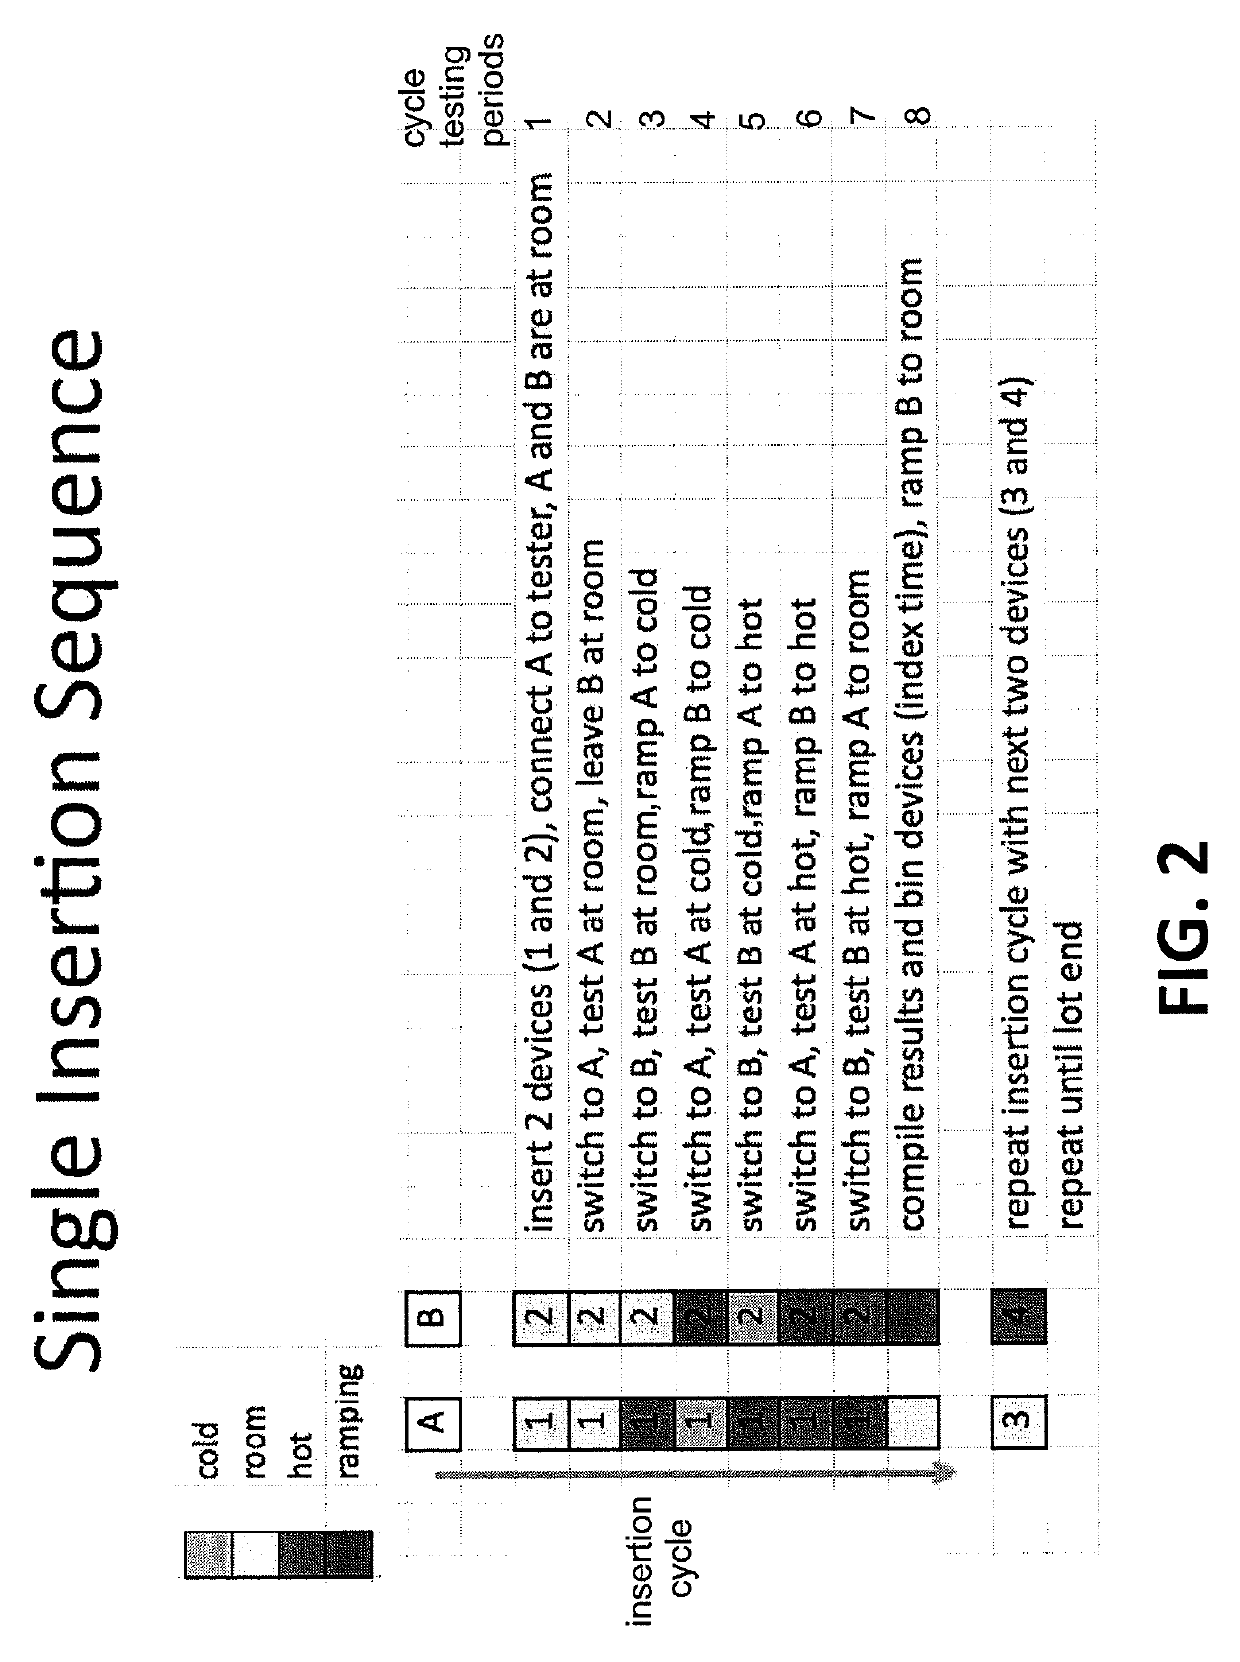 Method for continuous tester operation during multiple stage temperature testing